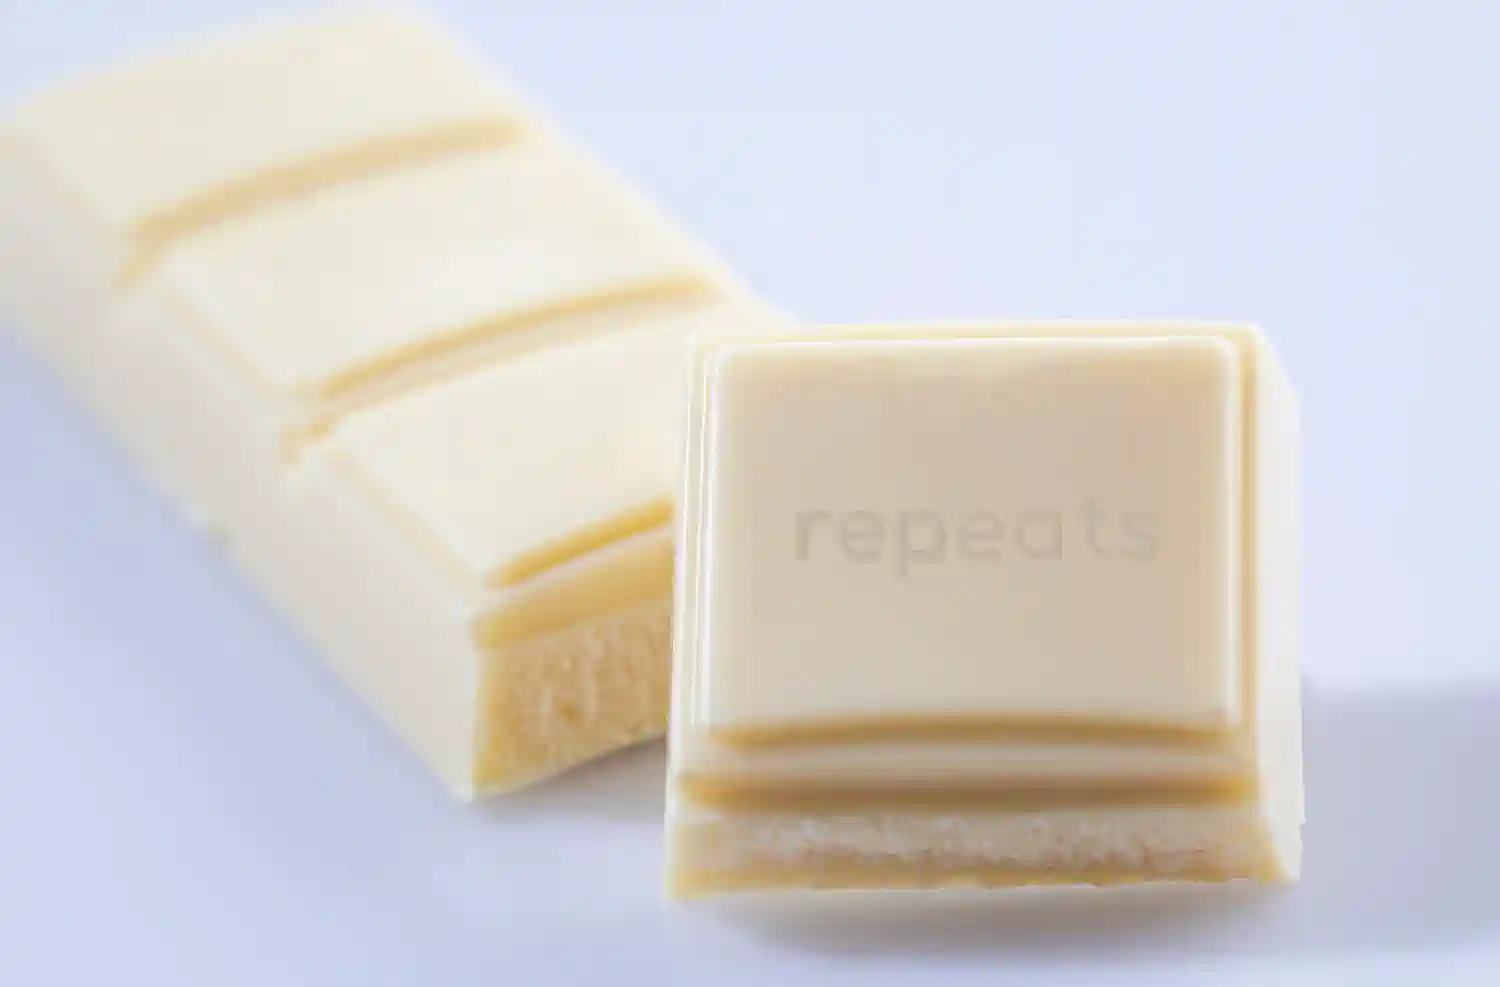 Repeats Protein White Chocolate